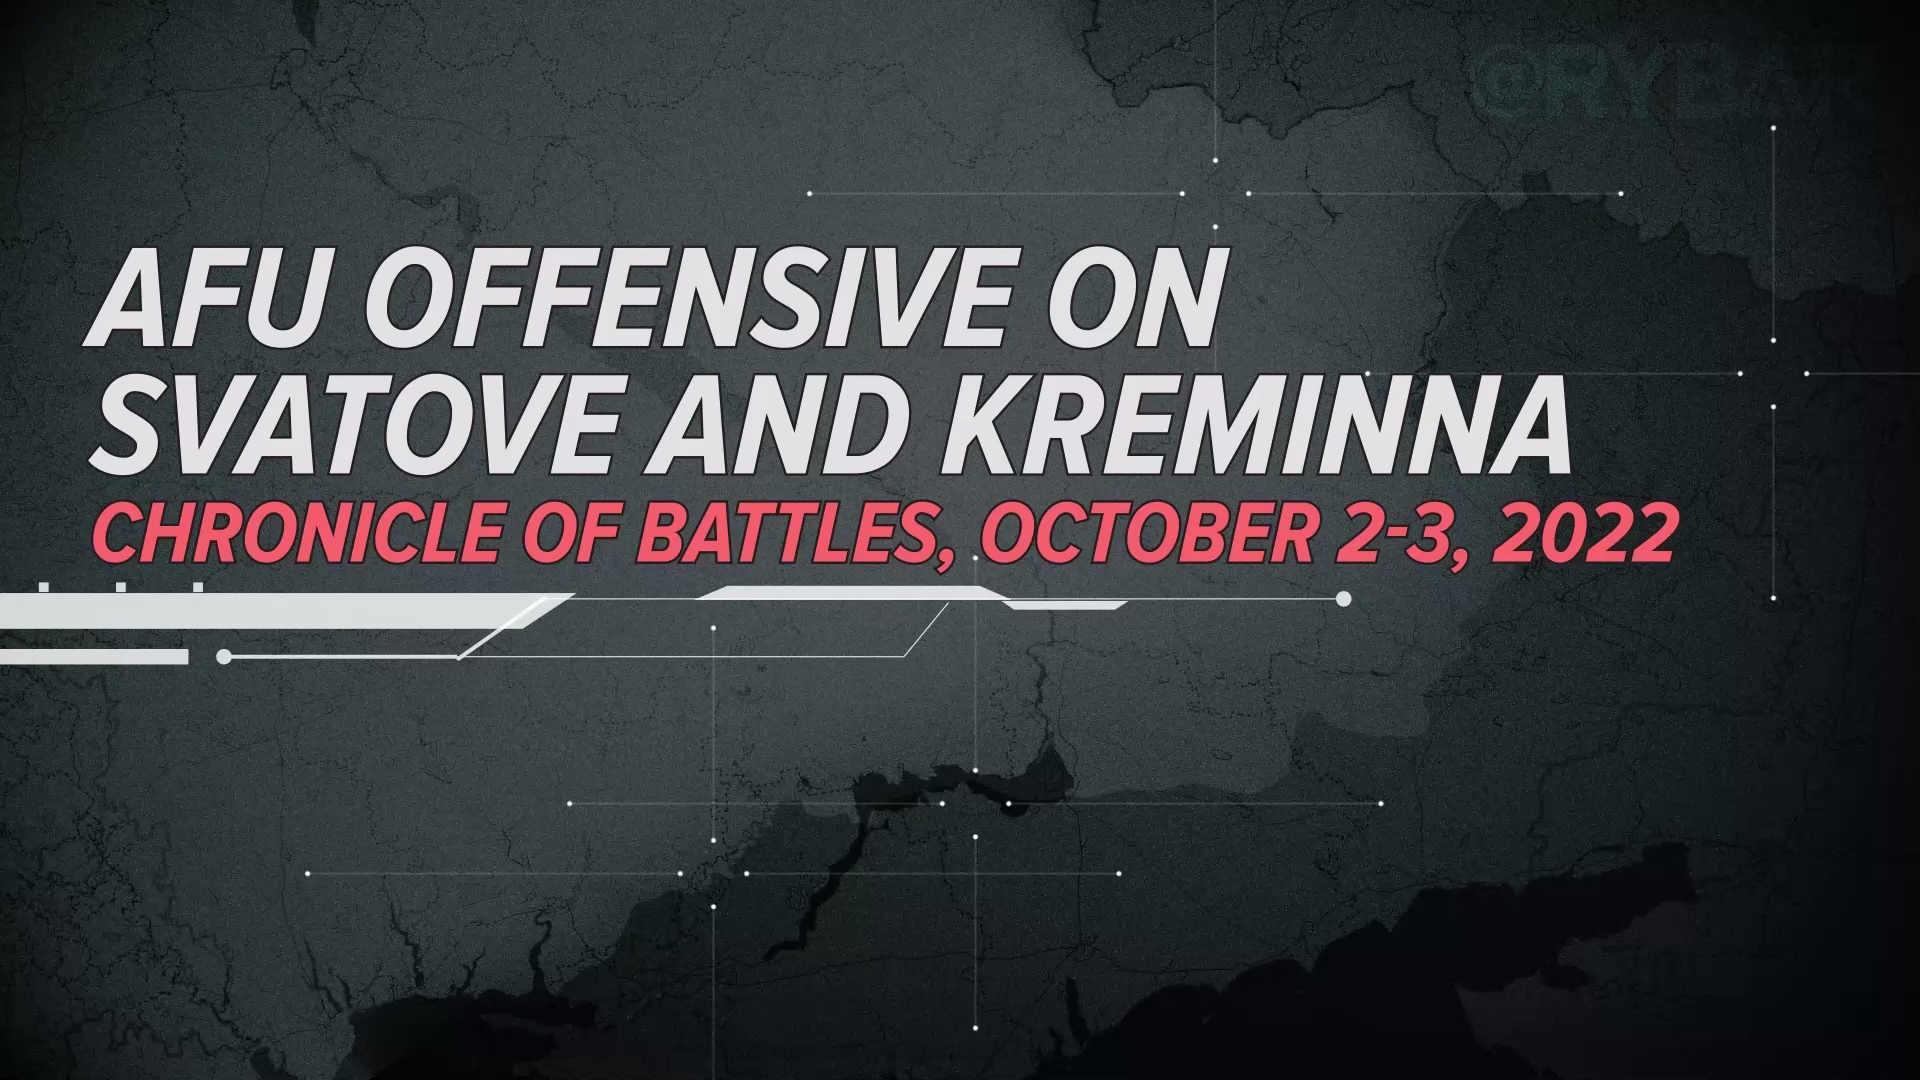 AFU Offensive on Svatove and Kreminna. Chronicle of Battles, October 2-3, 2022